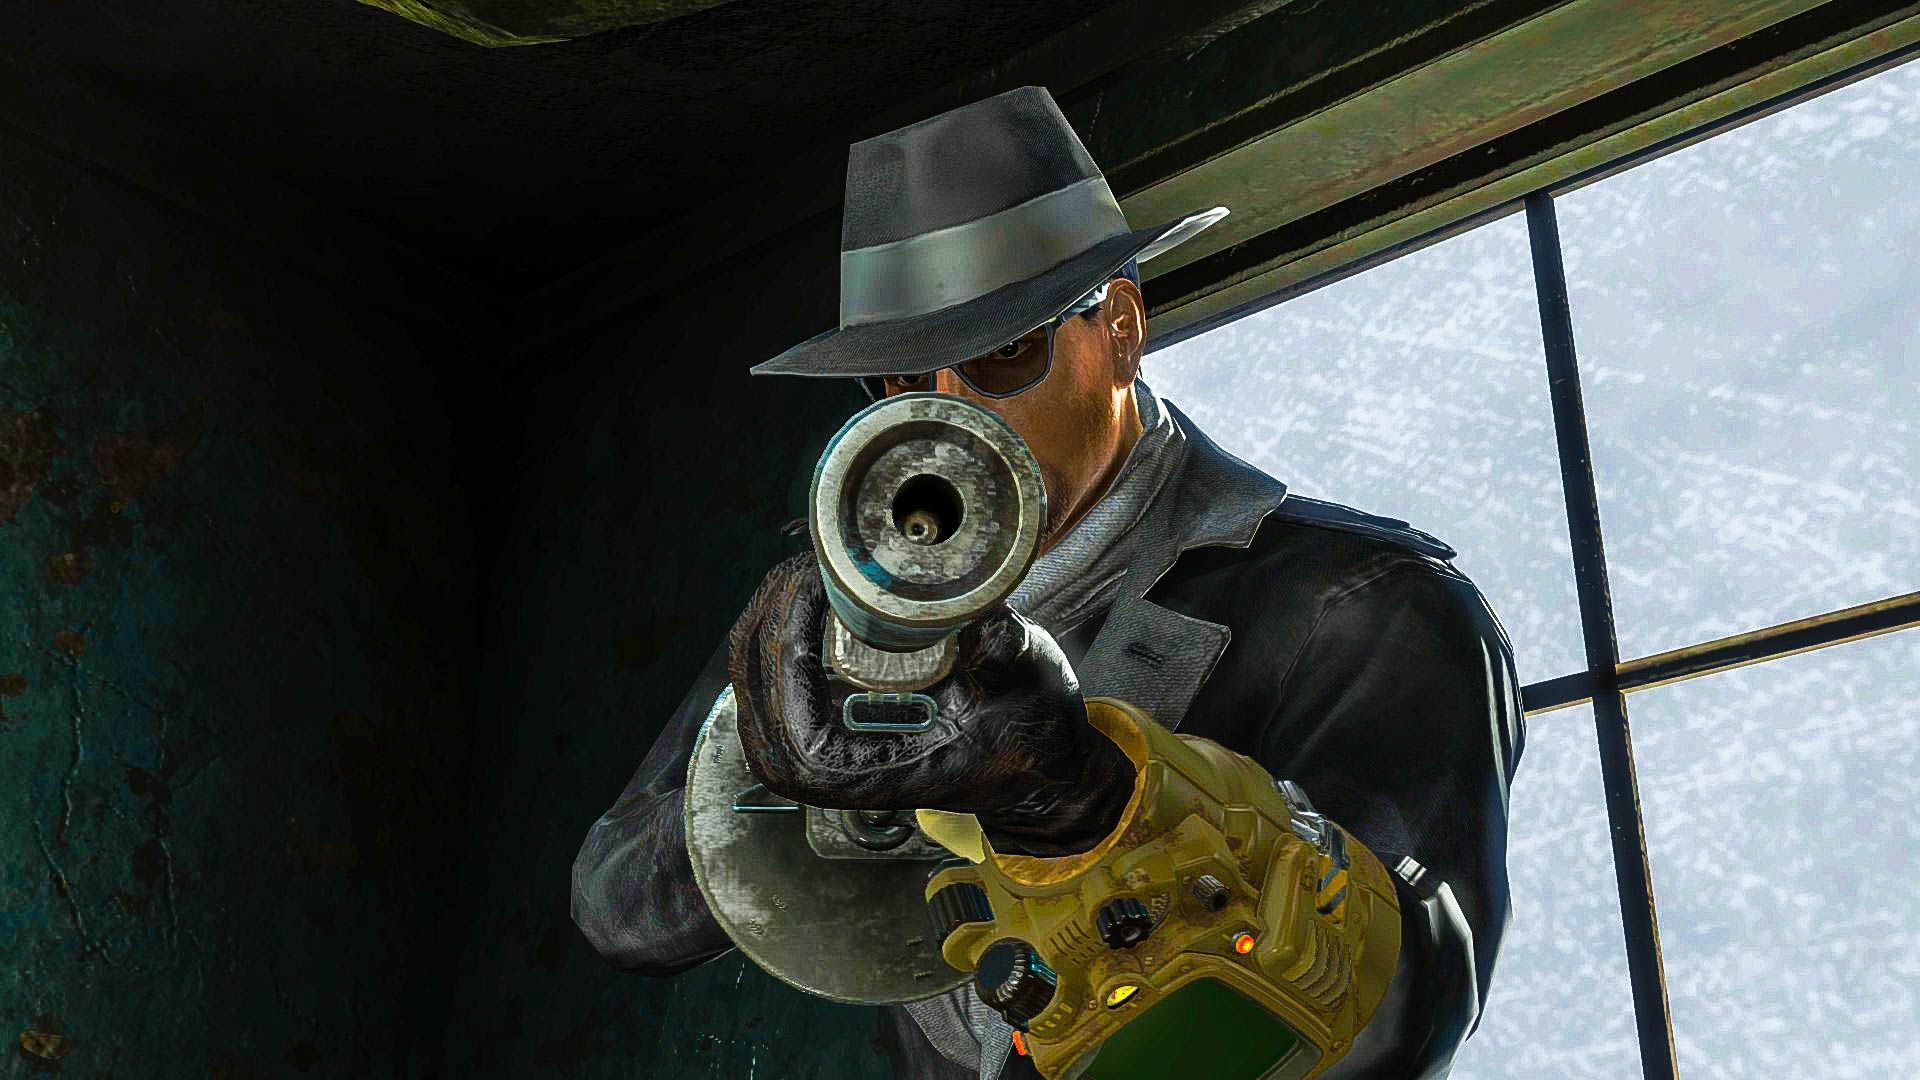 A character wearing a hat and glasses aiming a big weapon at you.